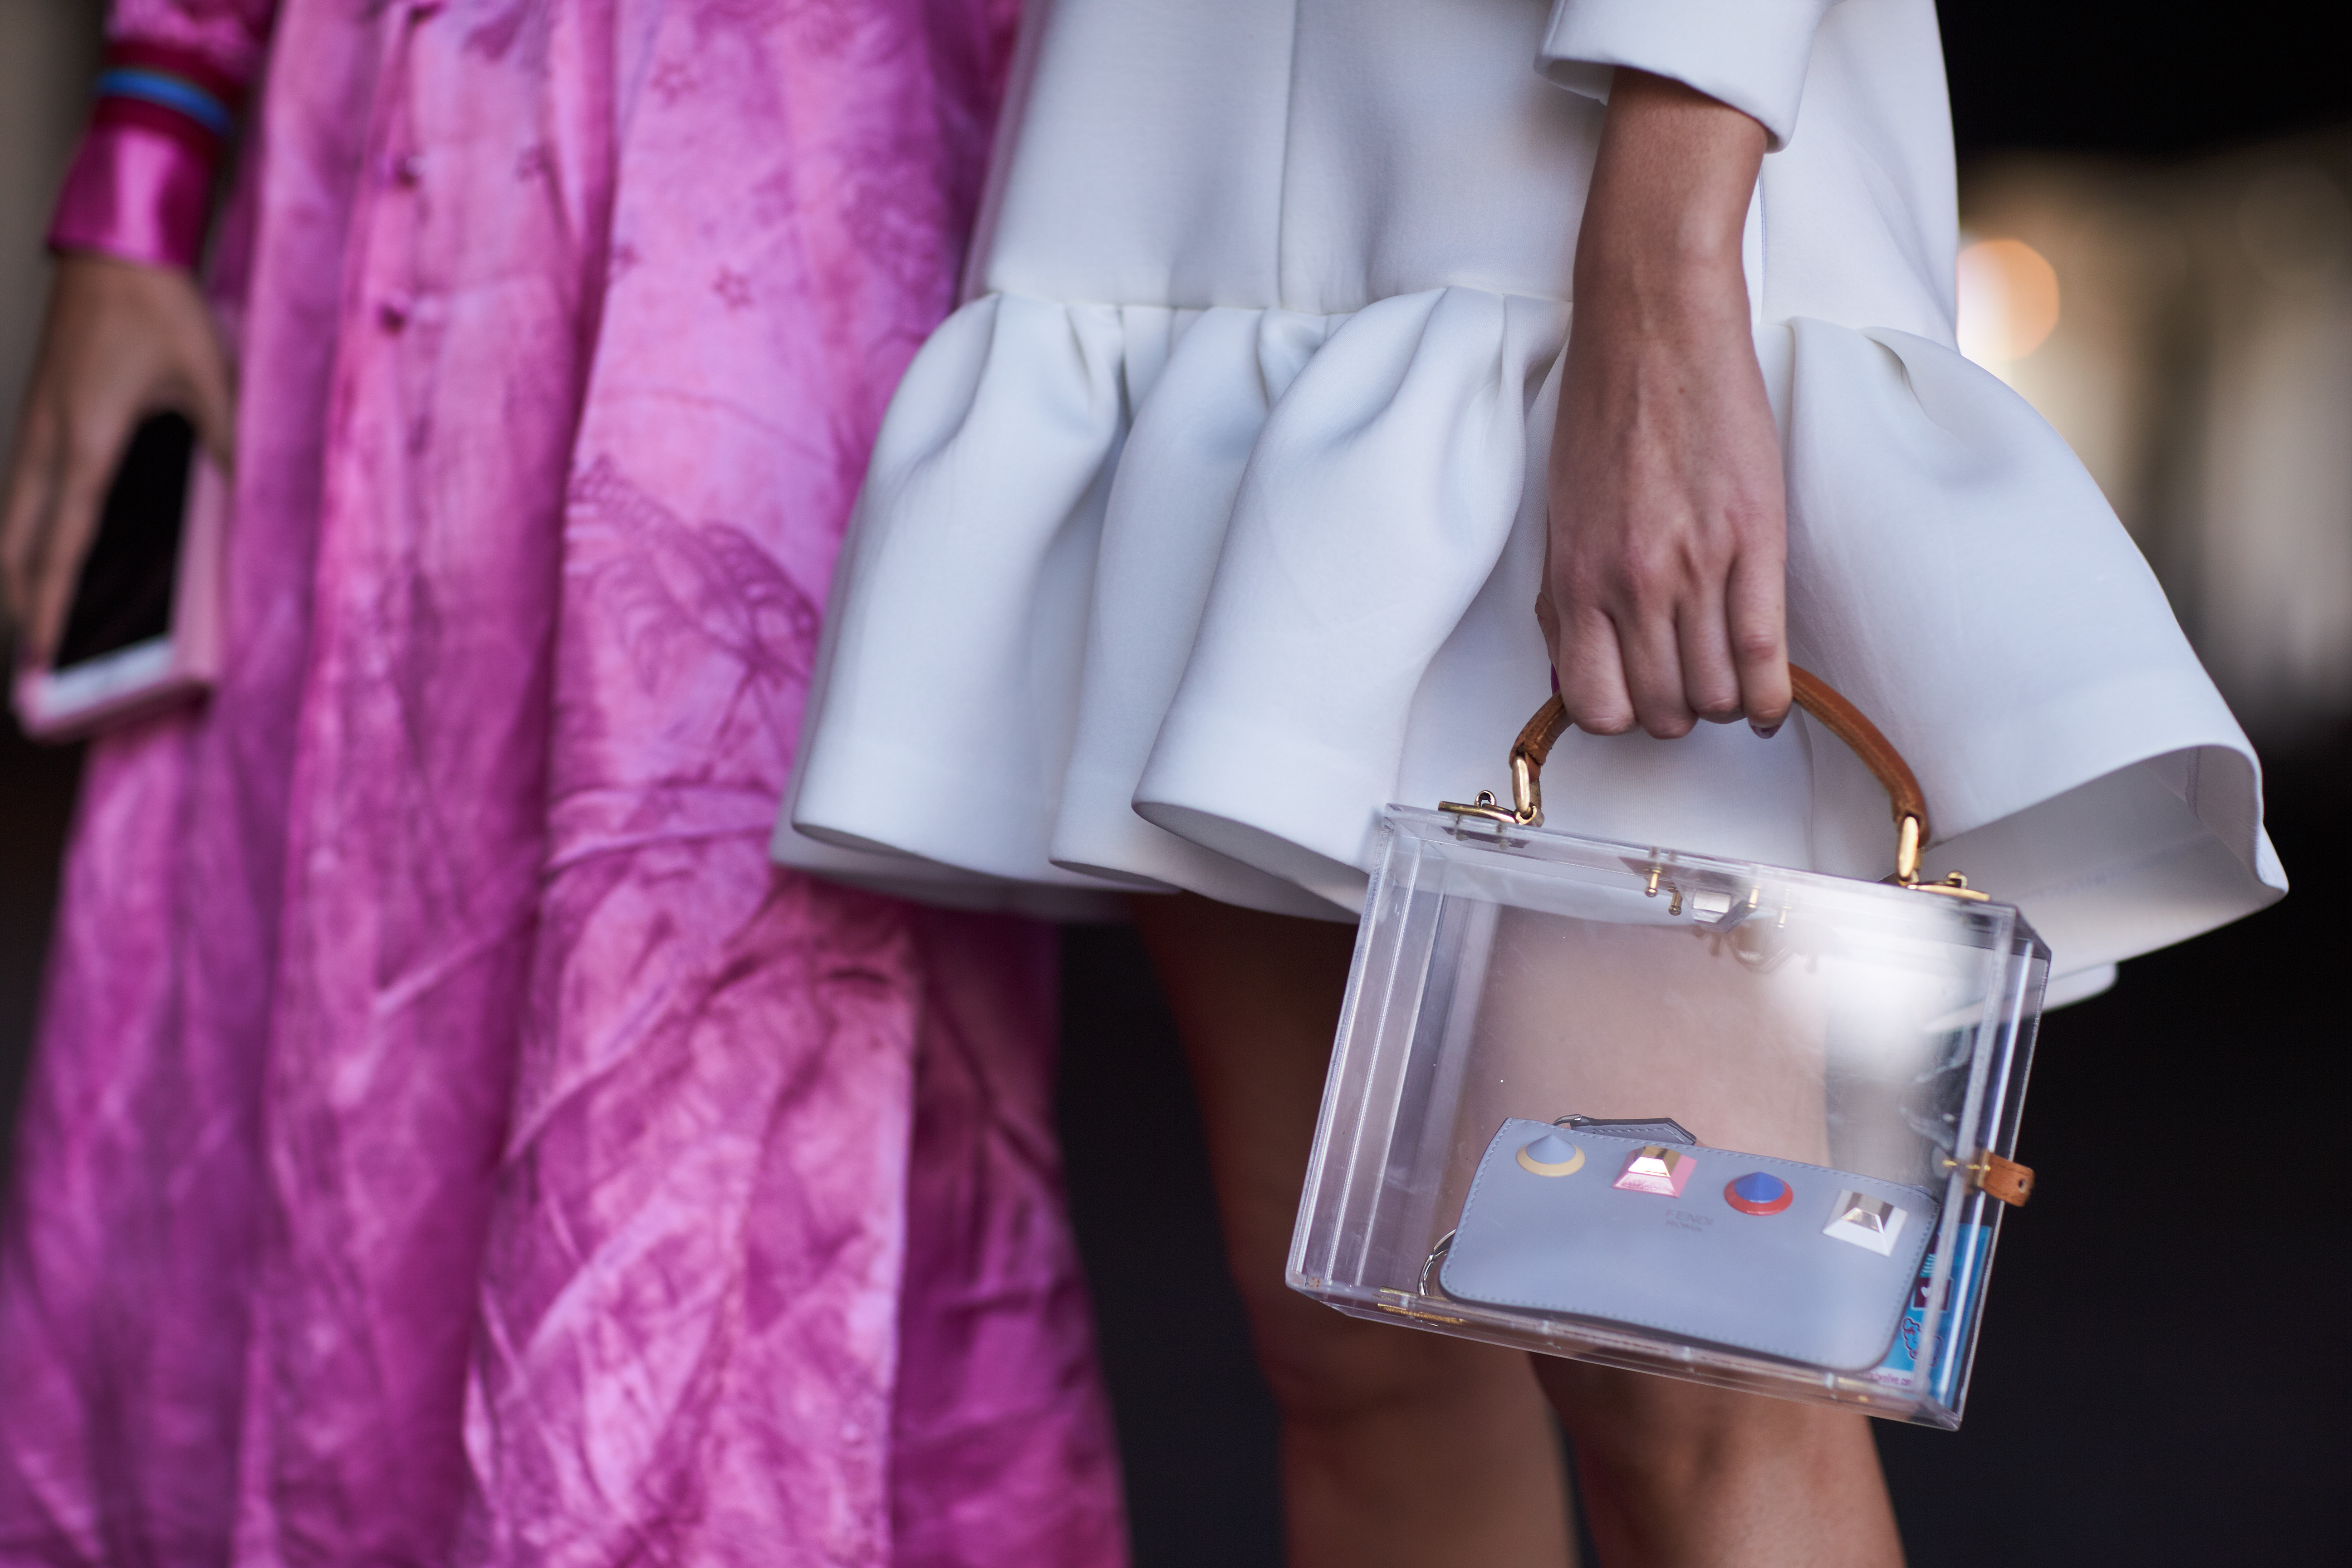 Style Transparency: See-through Bags Are (Clearly) Still Trending